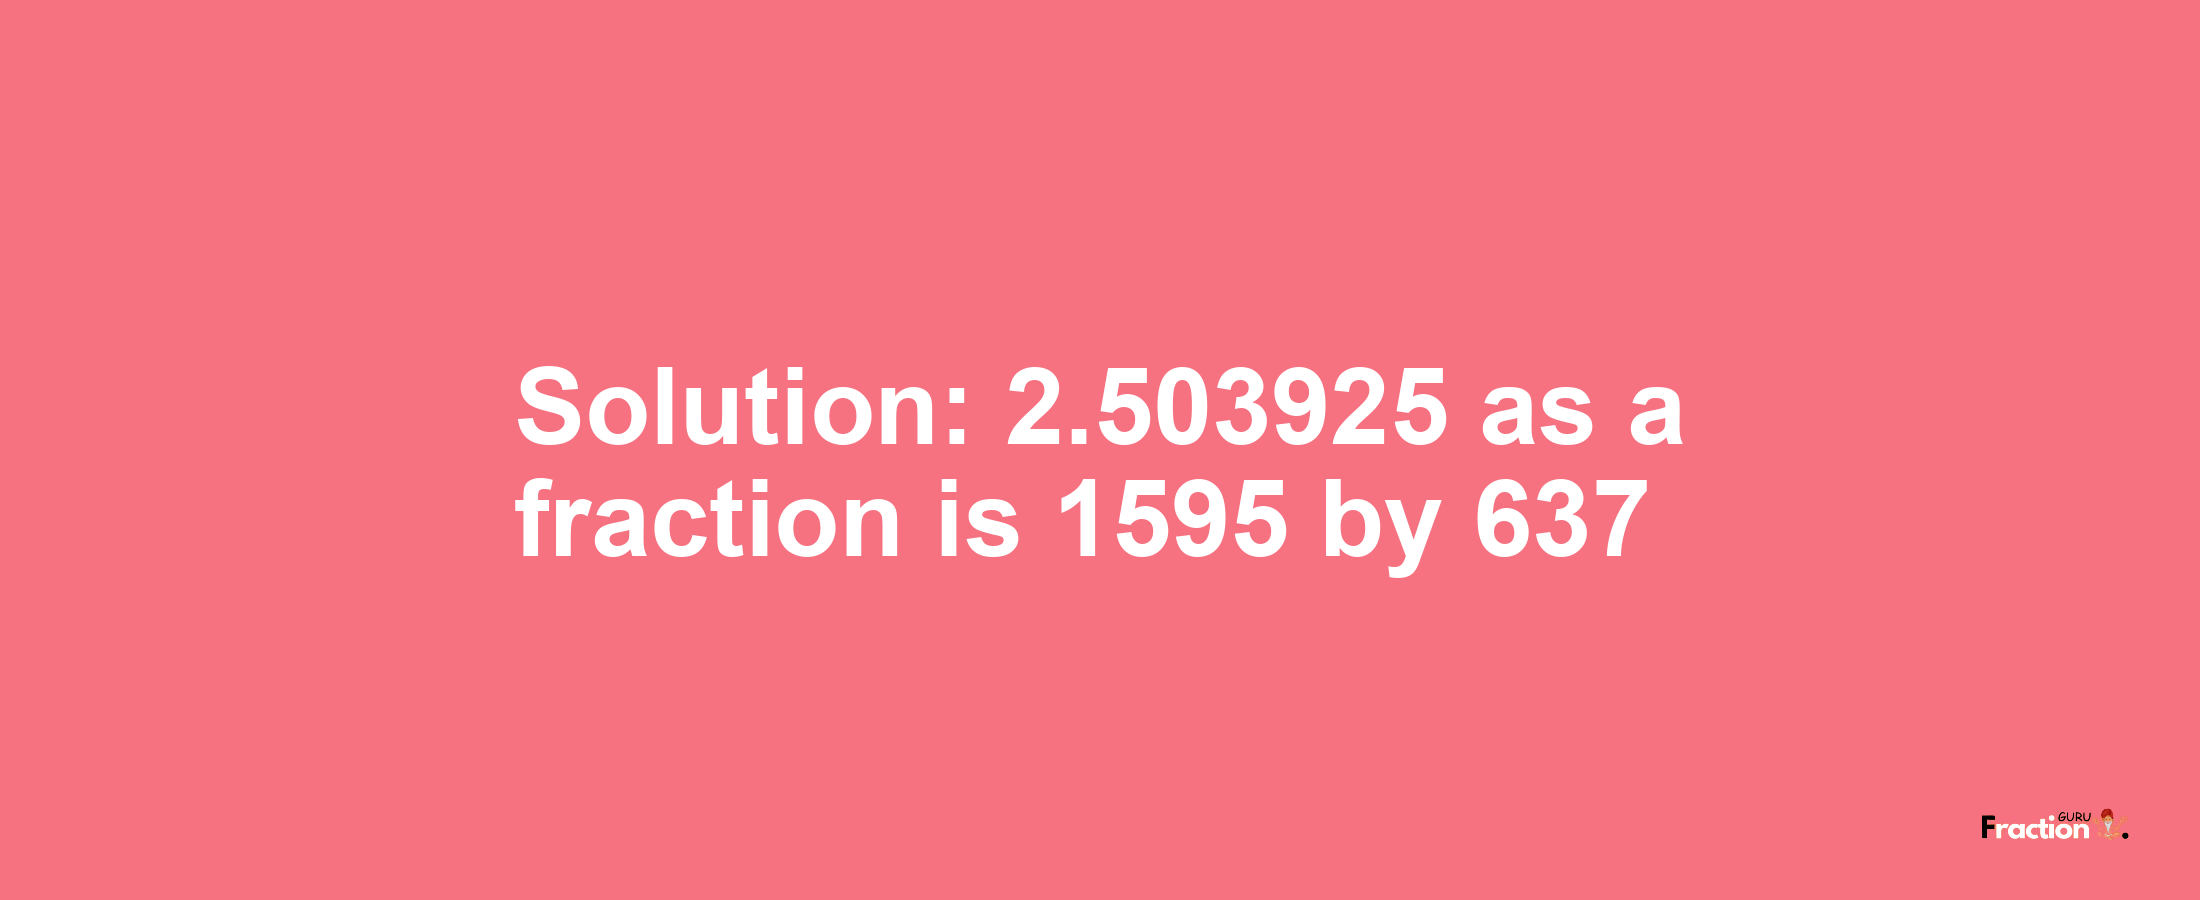 Solution:2.503925 as a fraction is 1595/637